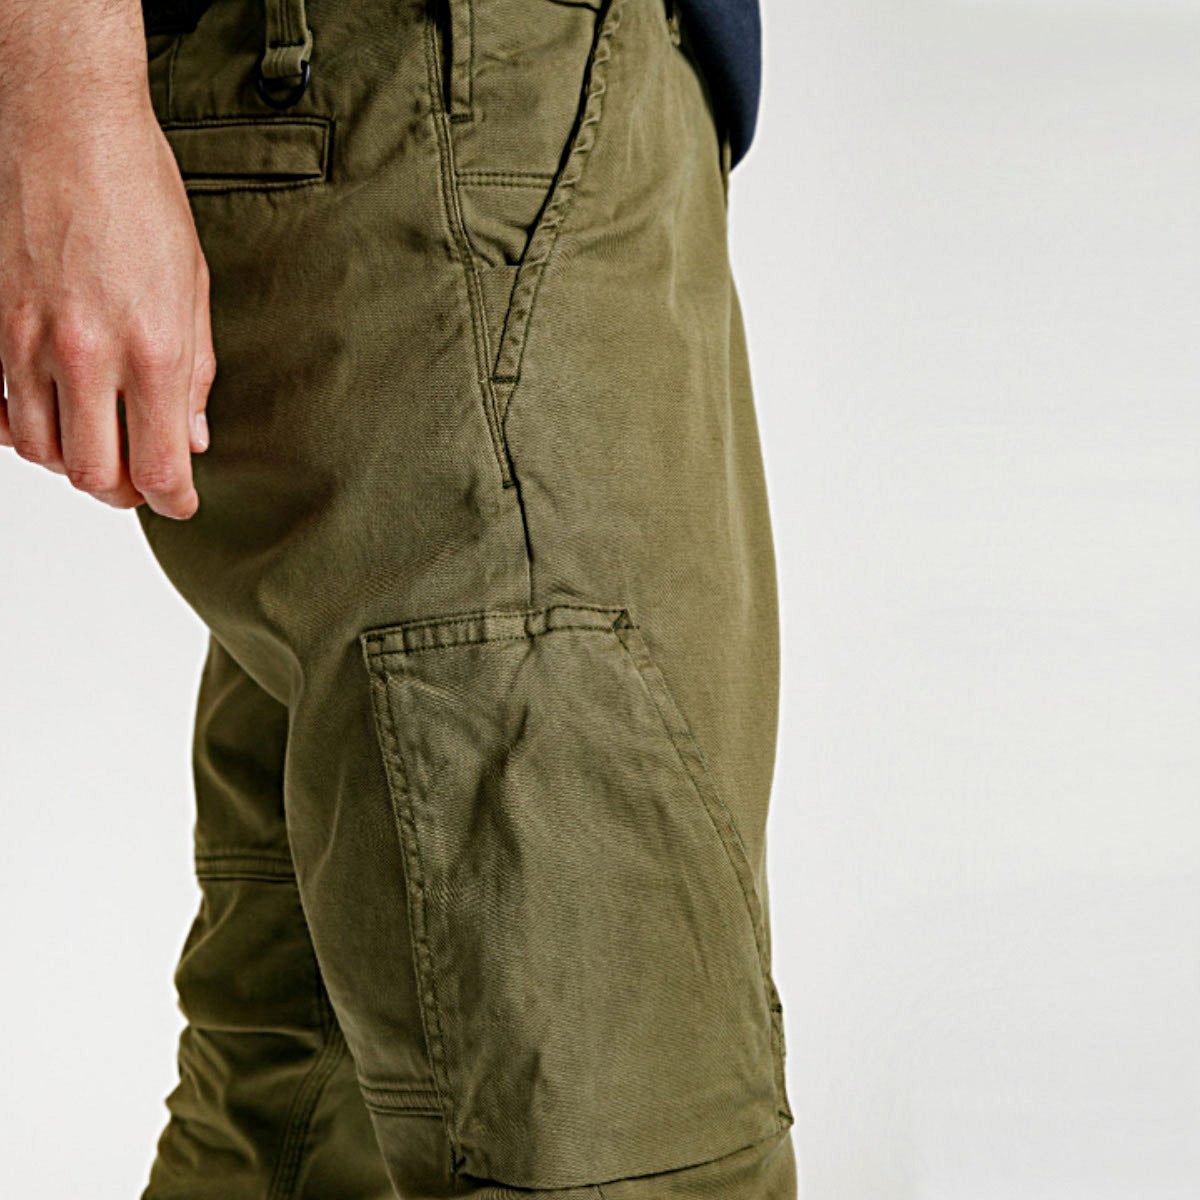 Duer - Live Free Adventure Pant  - Loden Green